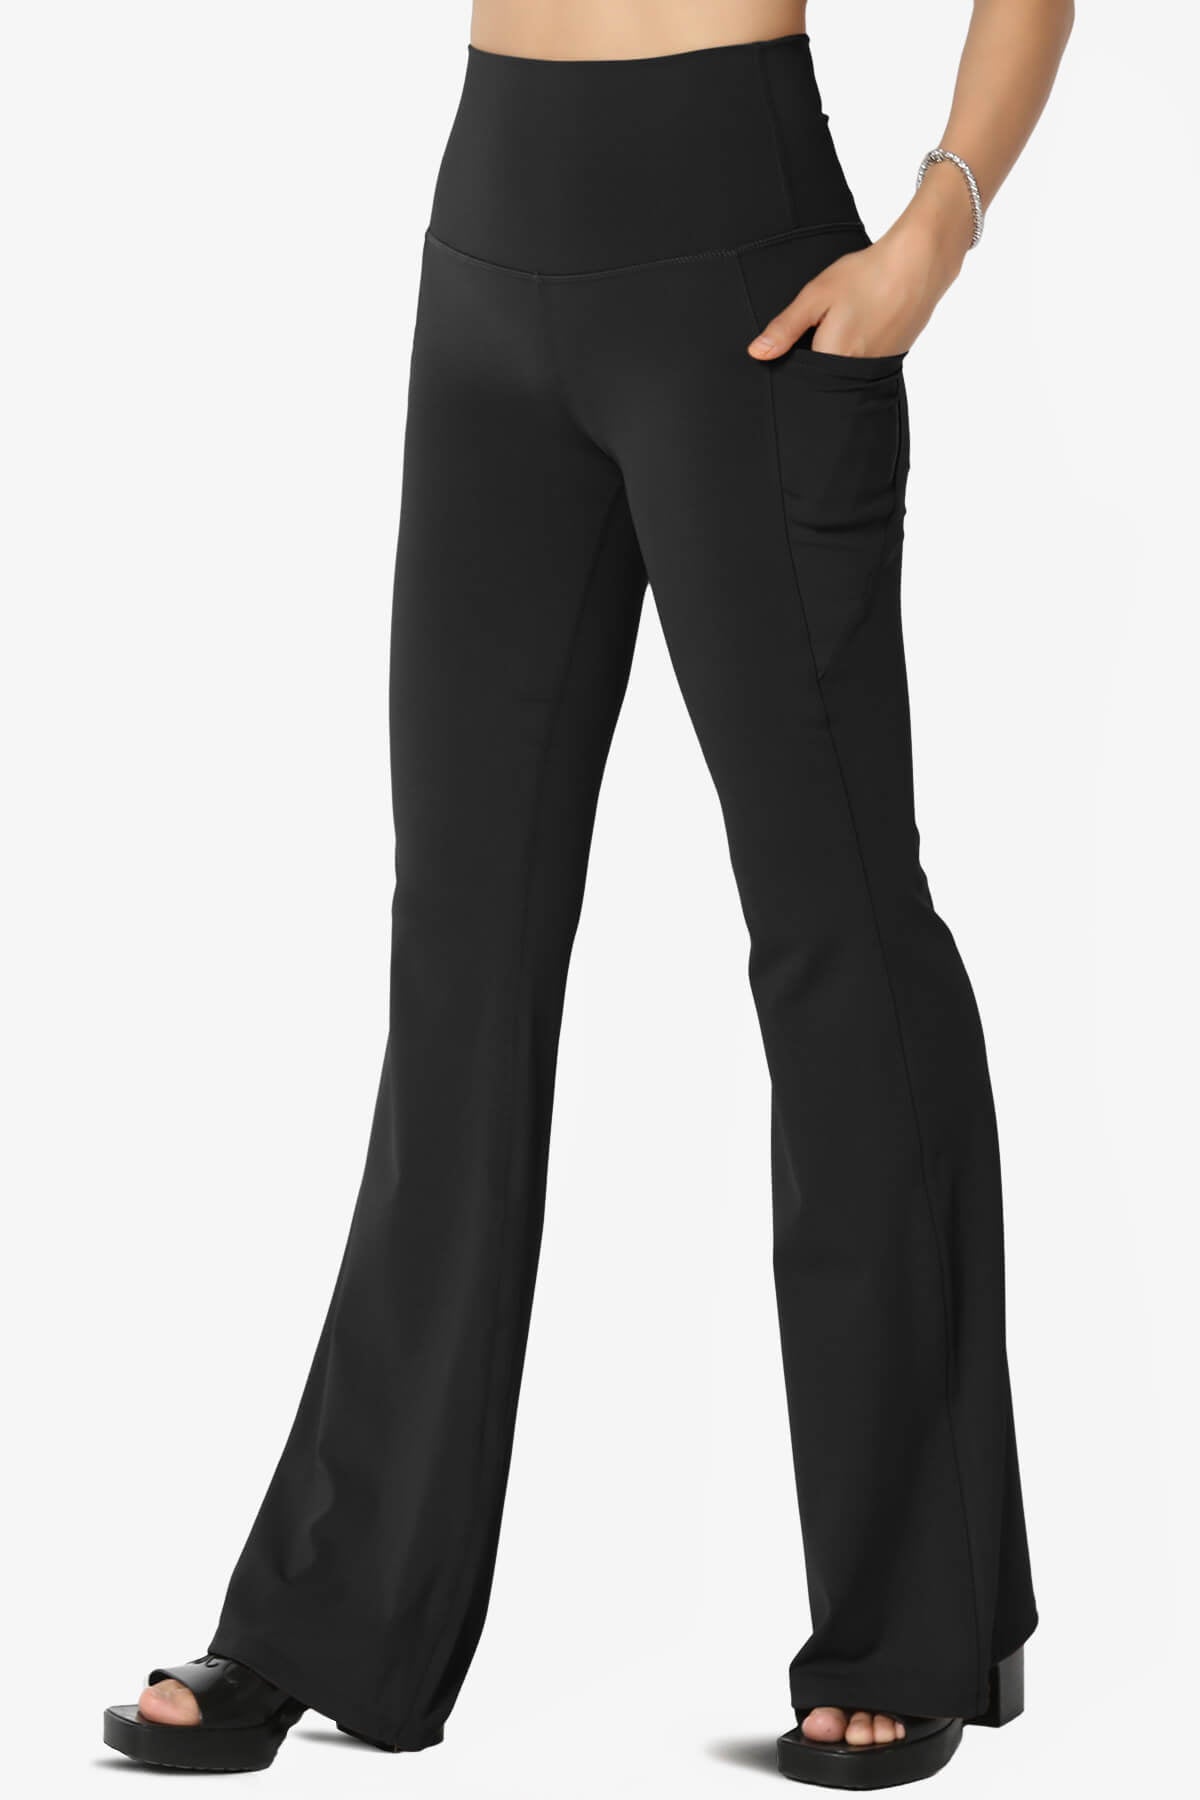 Yoga Pants With Flared Leg, Warm Lining And Pockets